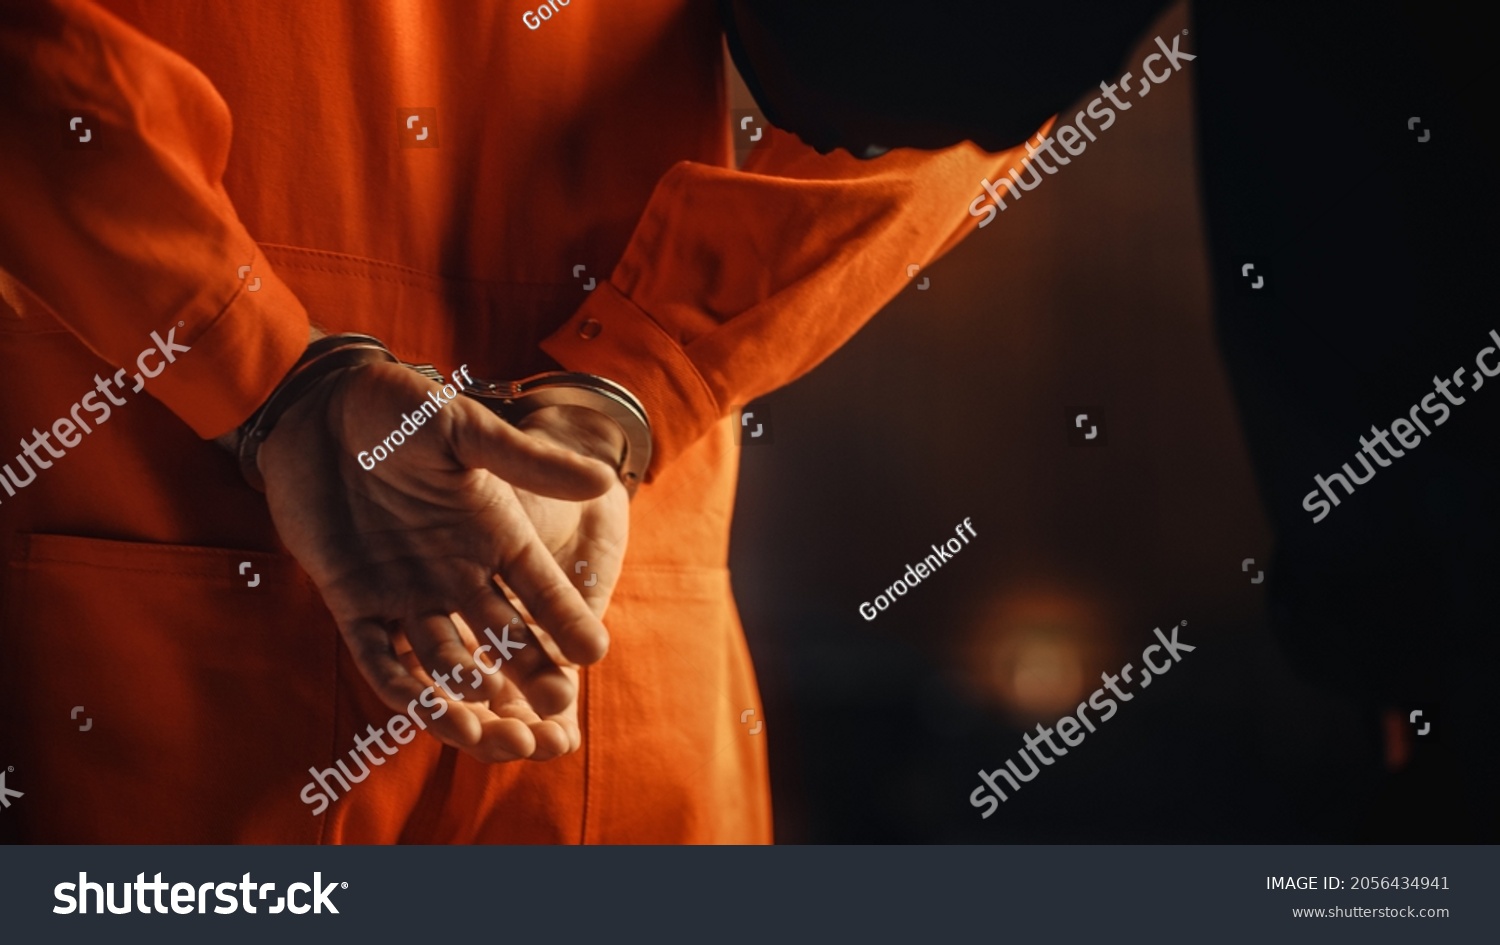 Arrested Handcuffed Convict at a Law and Justice Court Trial. Handcuffs on Accused Criminal in Orange Jail Jumpsuit. Law Offender Sentenced to Serve Jail Time. #2056434941